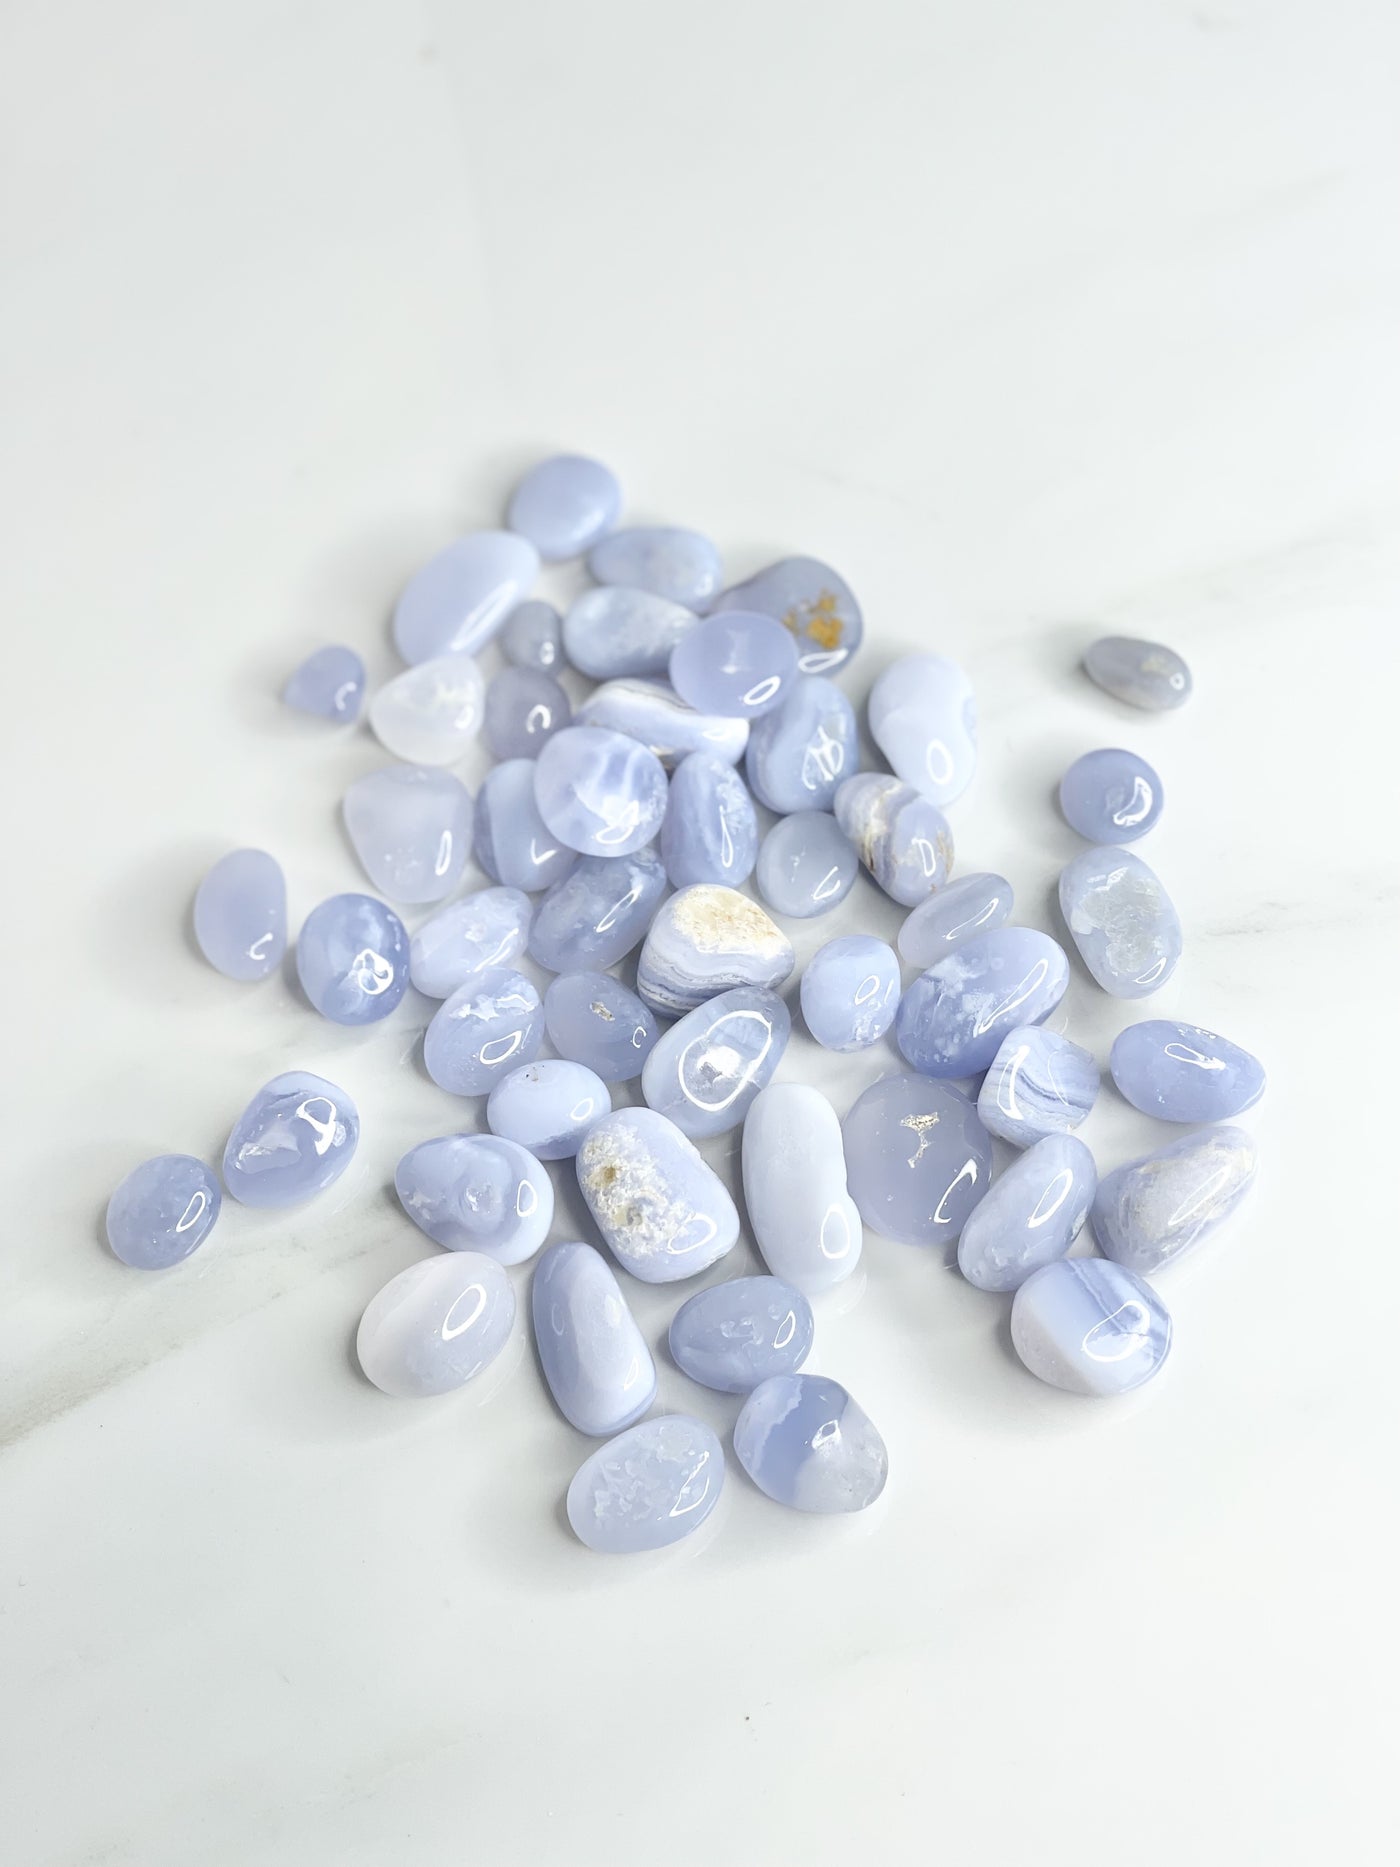 Blue Lace Agate - The Stone for Inner Peace